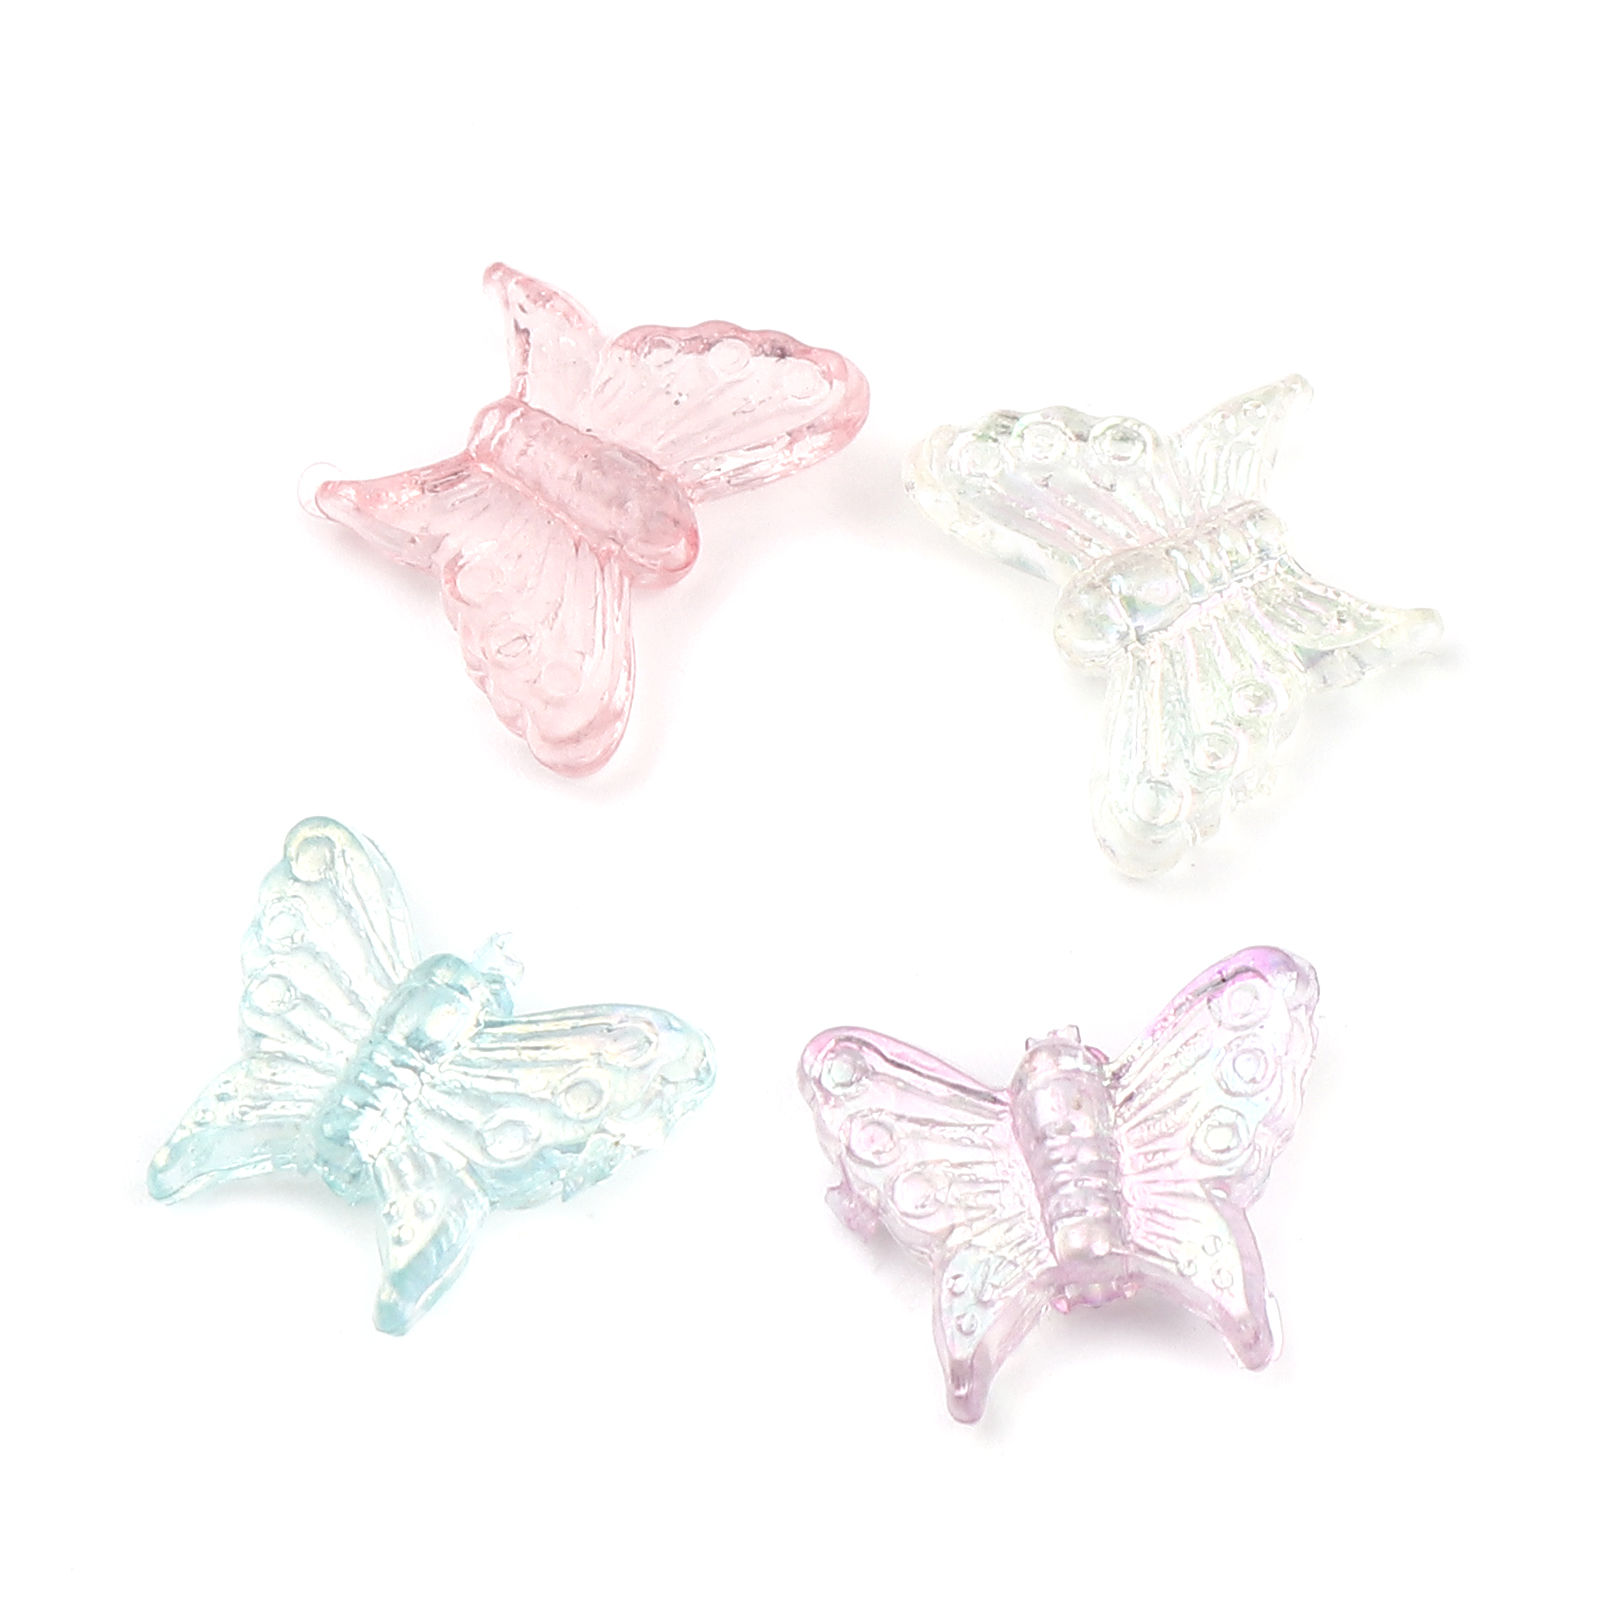 Picture of Acrylic Insect Beads Butterfly Animal White AB Color ABout 16mm x 13mm, Hole: Approx 1.4mm, 100 PCs